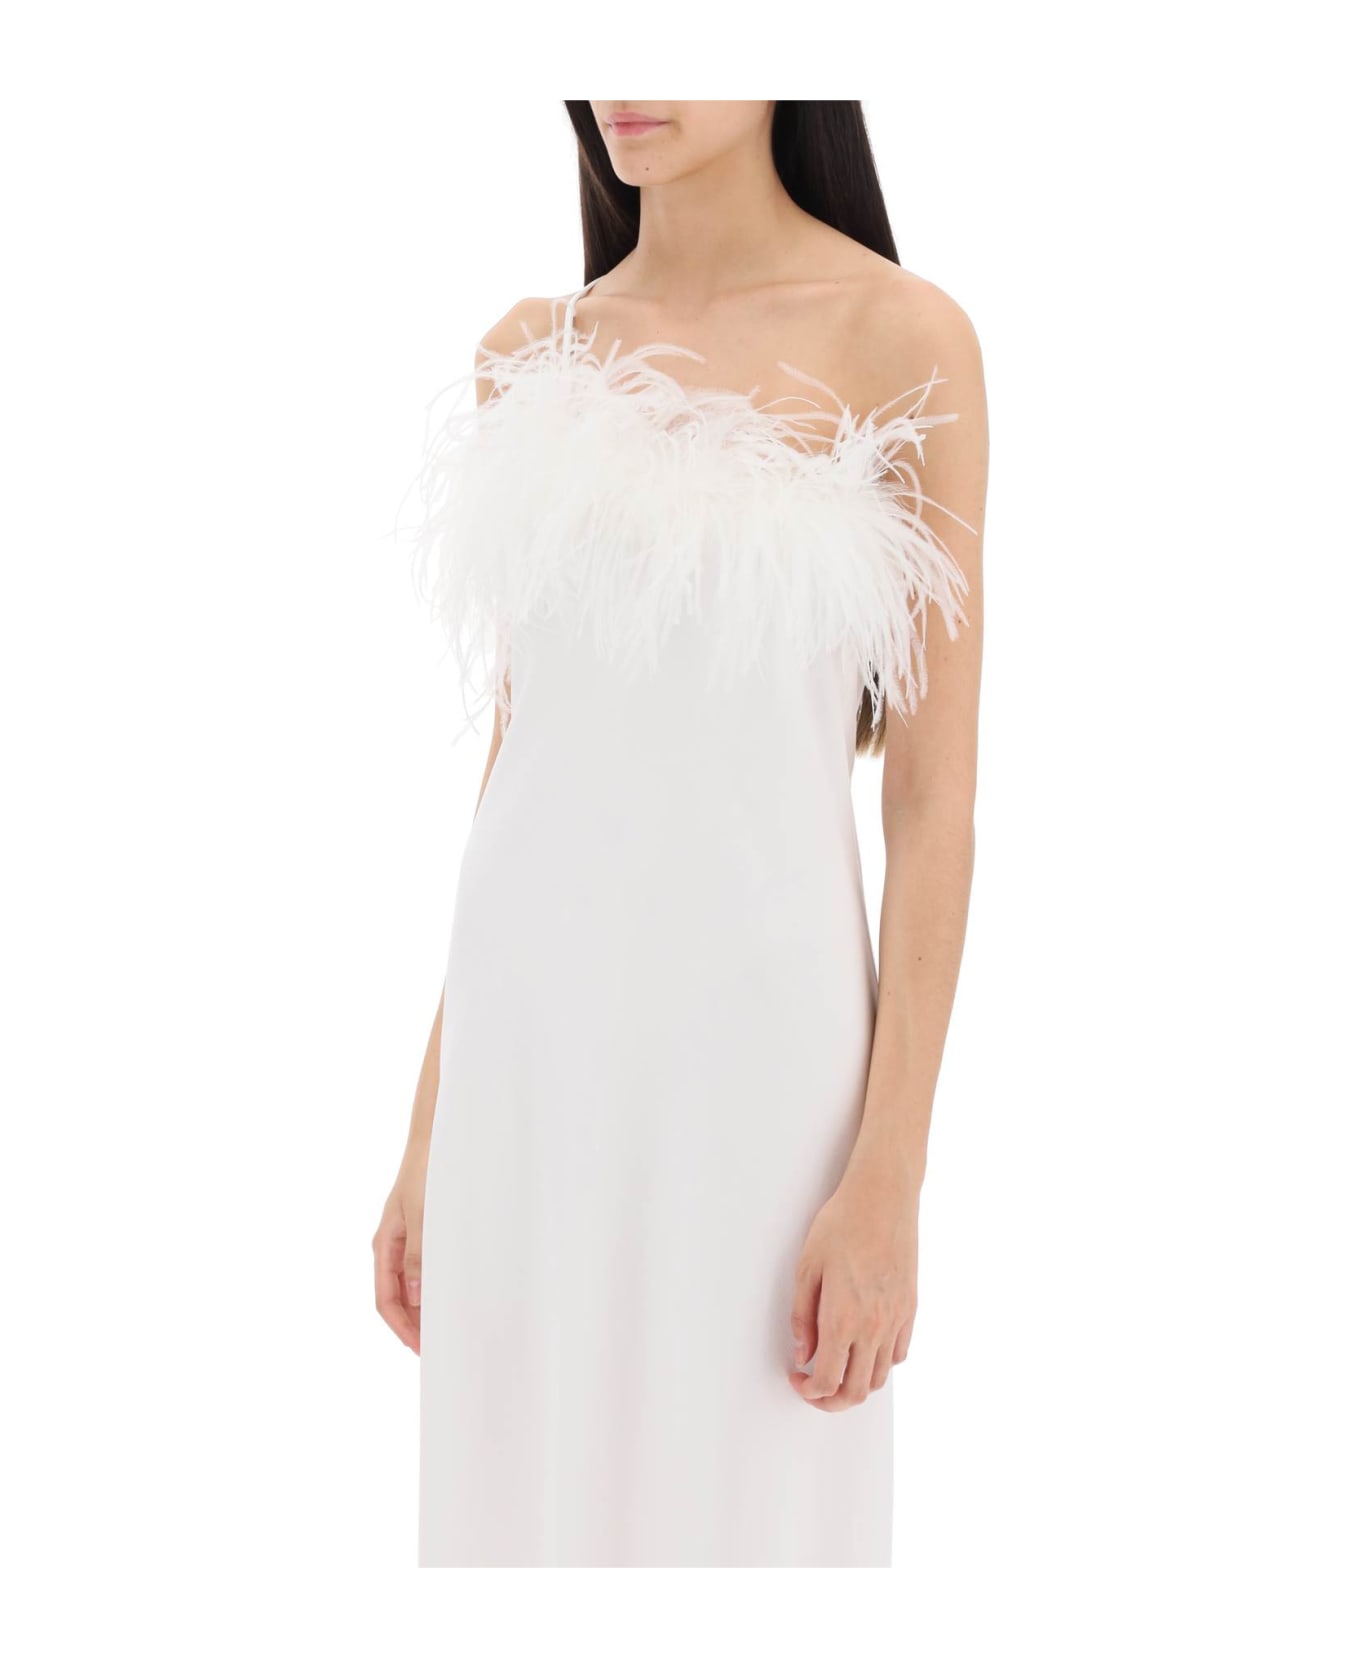 Art Dealer 'ember' Maxi Dress In Satin With Feathers - WHITE (White)